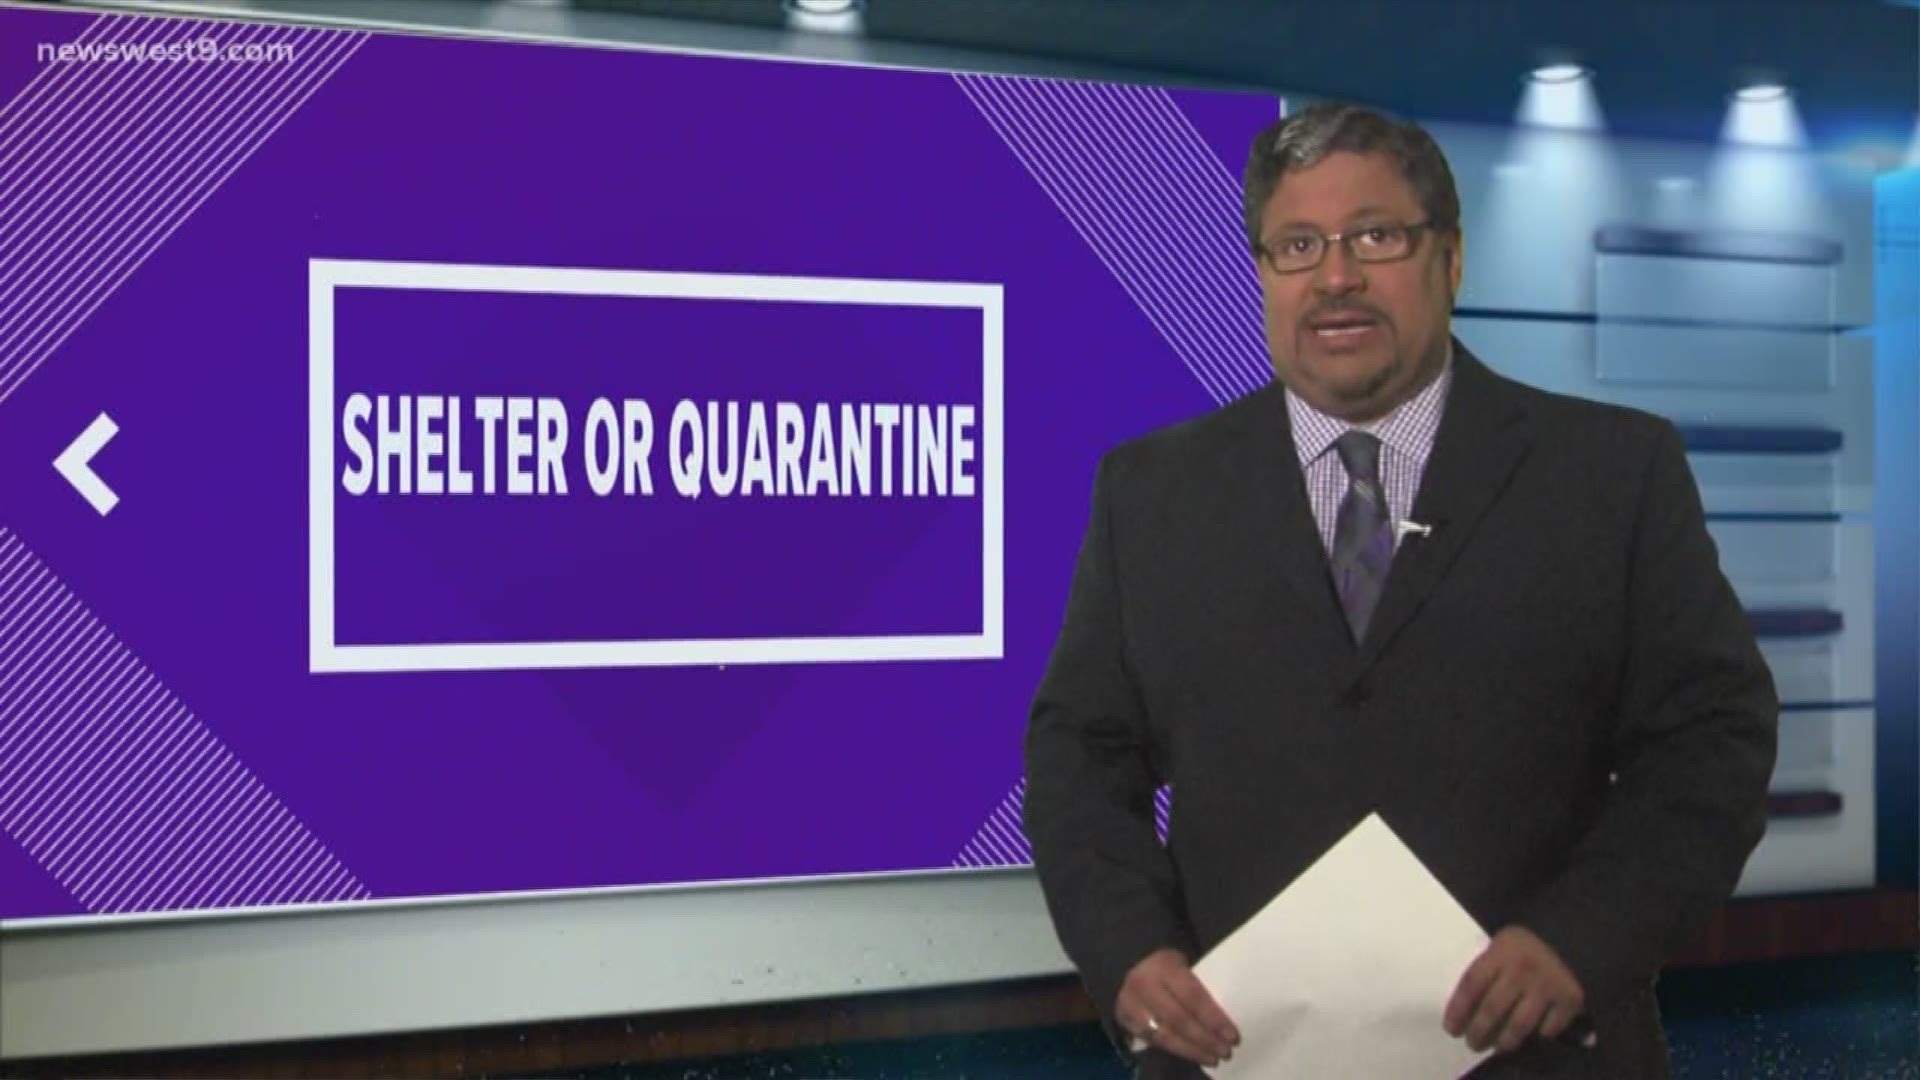 Victor Lopez explains the difference between "shelter in place" and "quarantine"